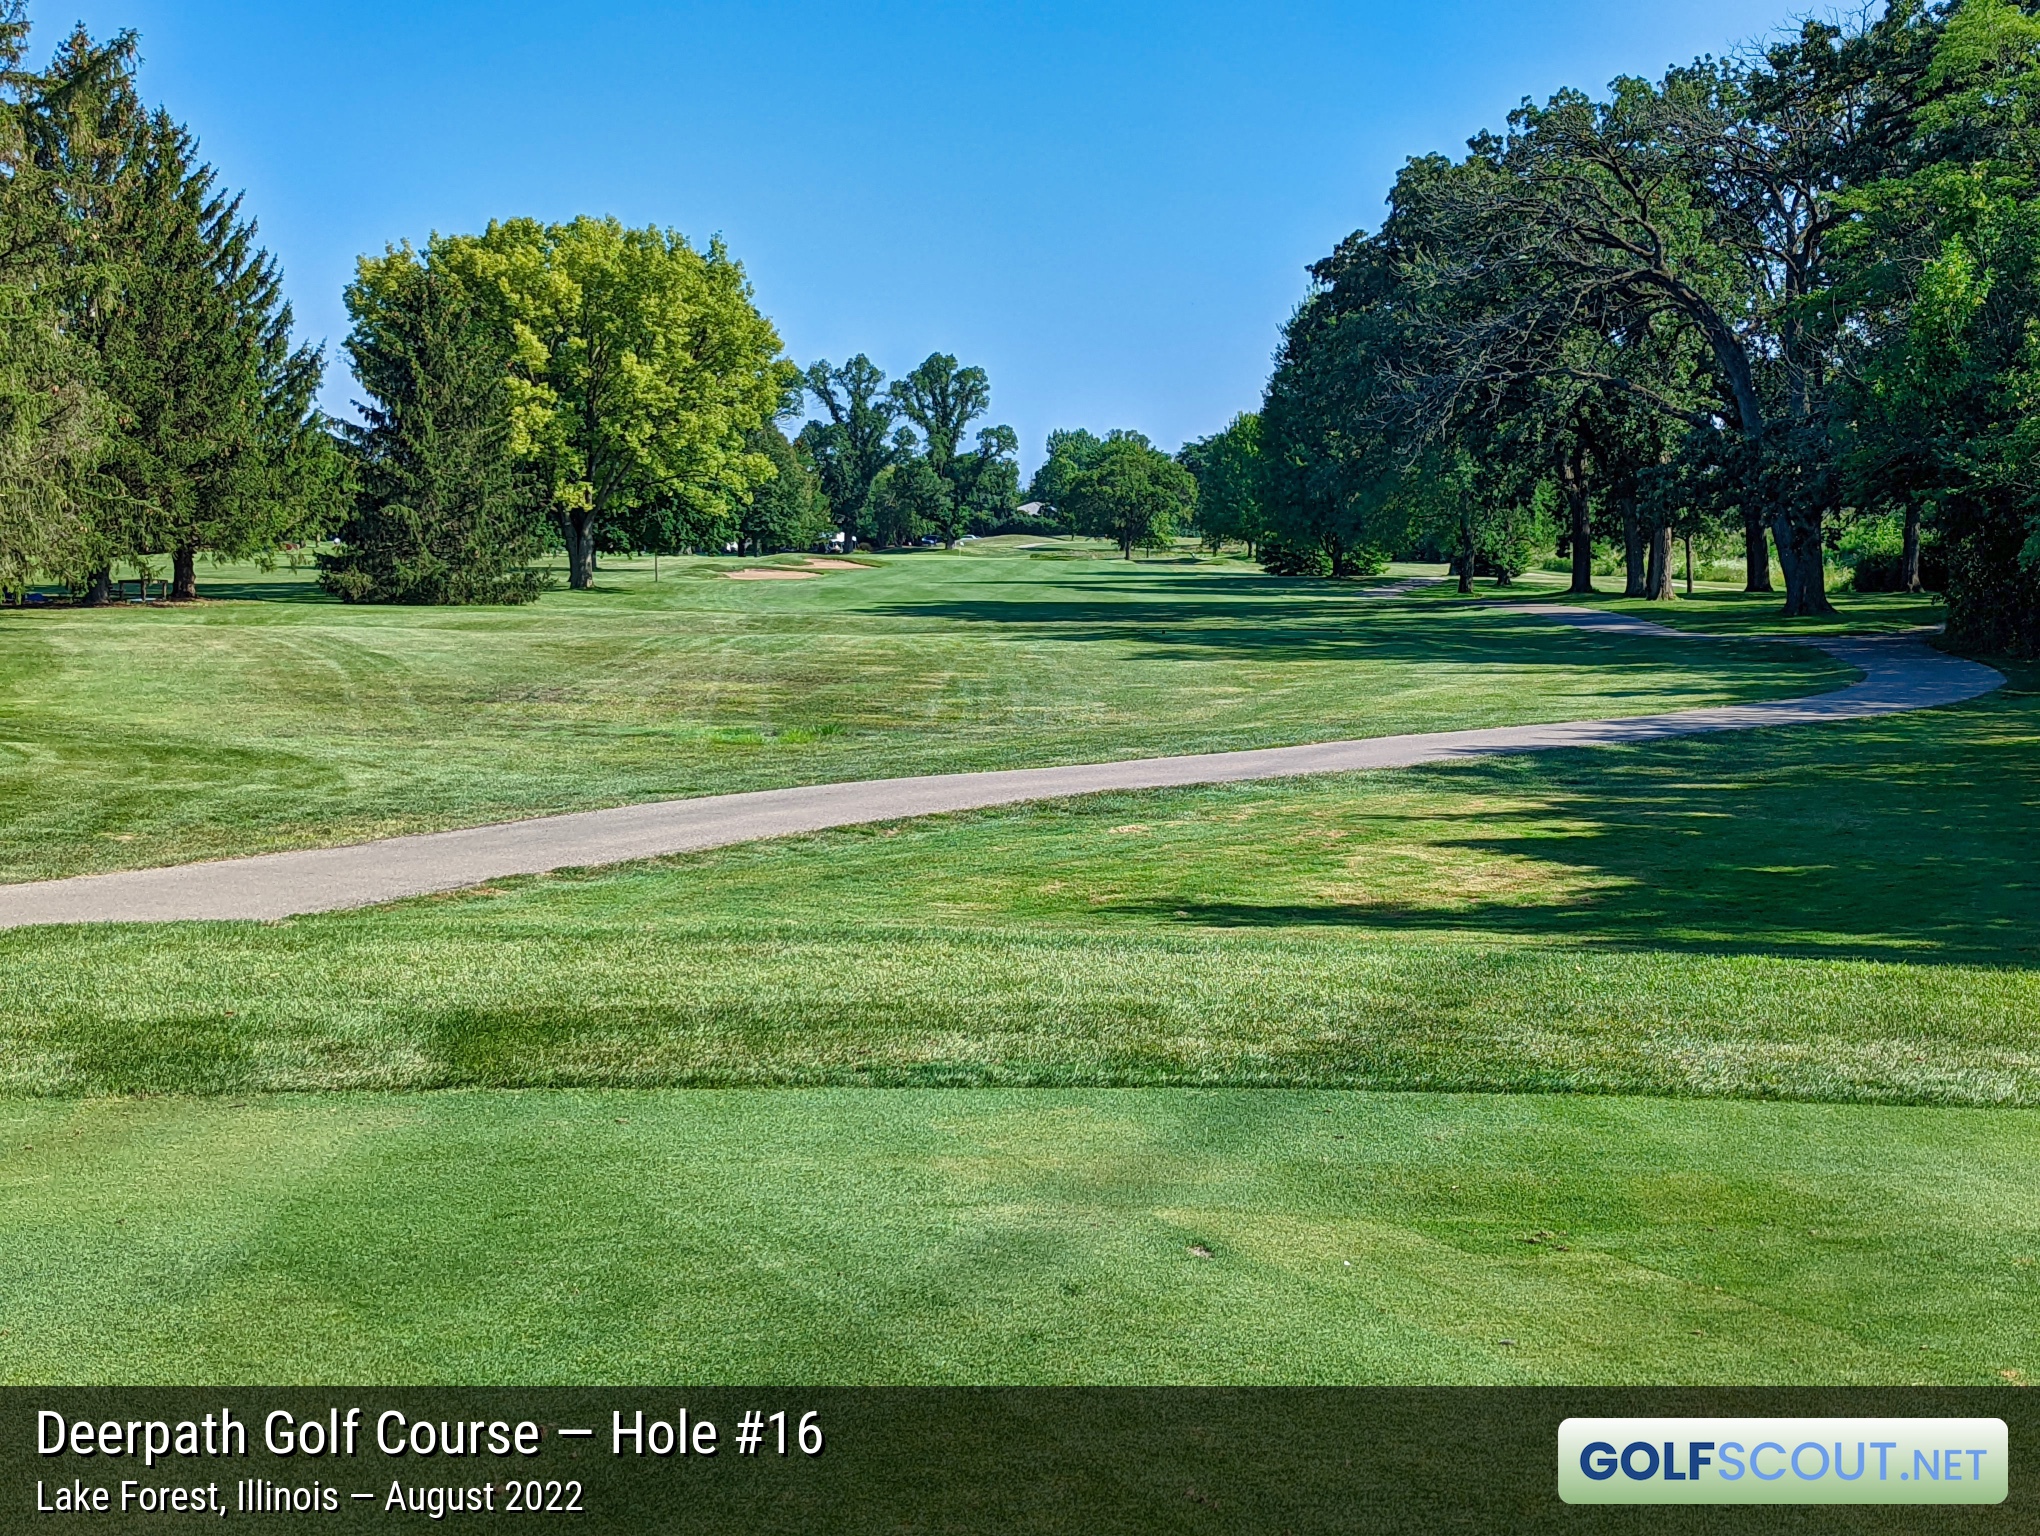 Photo of hole #16 at Deerpath Golf Course in Lake Forest, Illinois. 